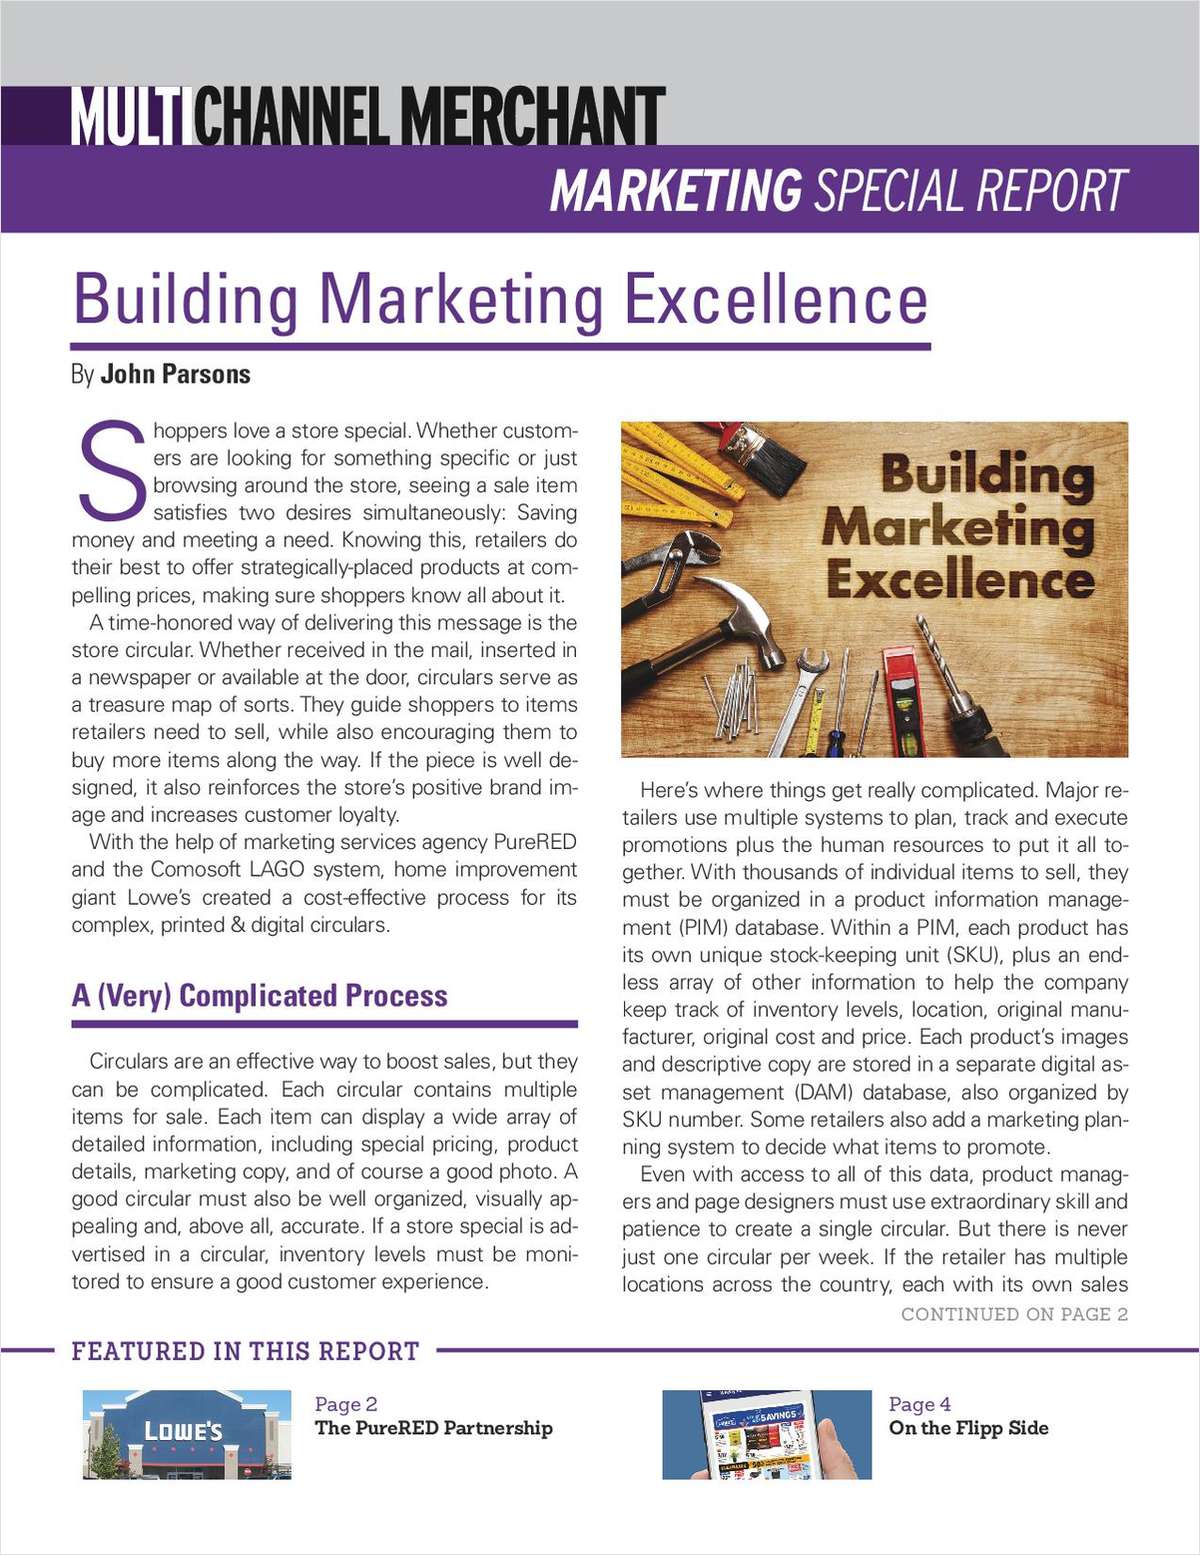 Building Cross-Channel Marketing Excellence at Lowe’s